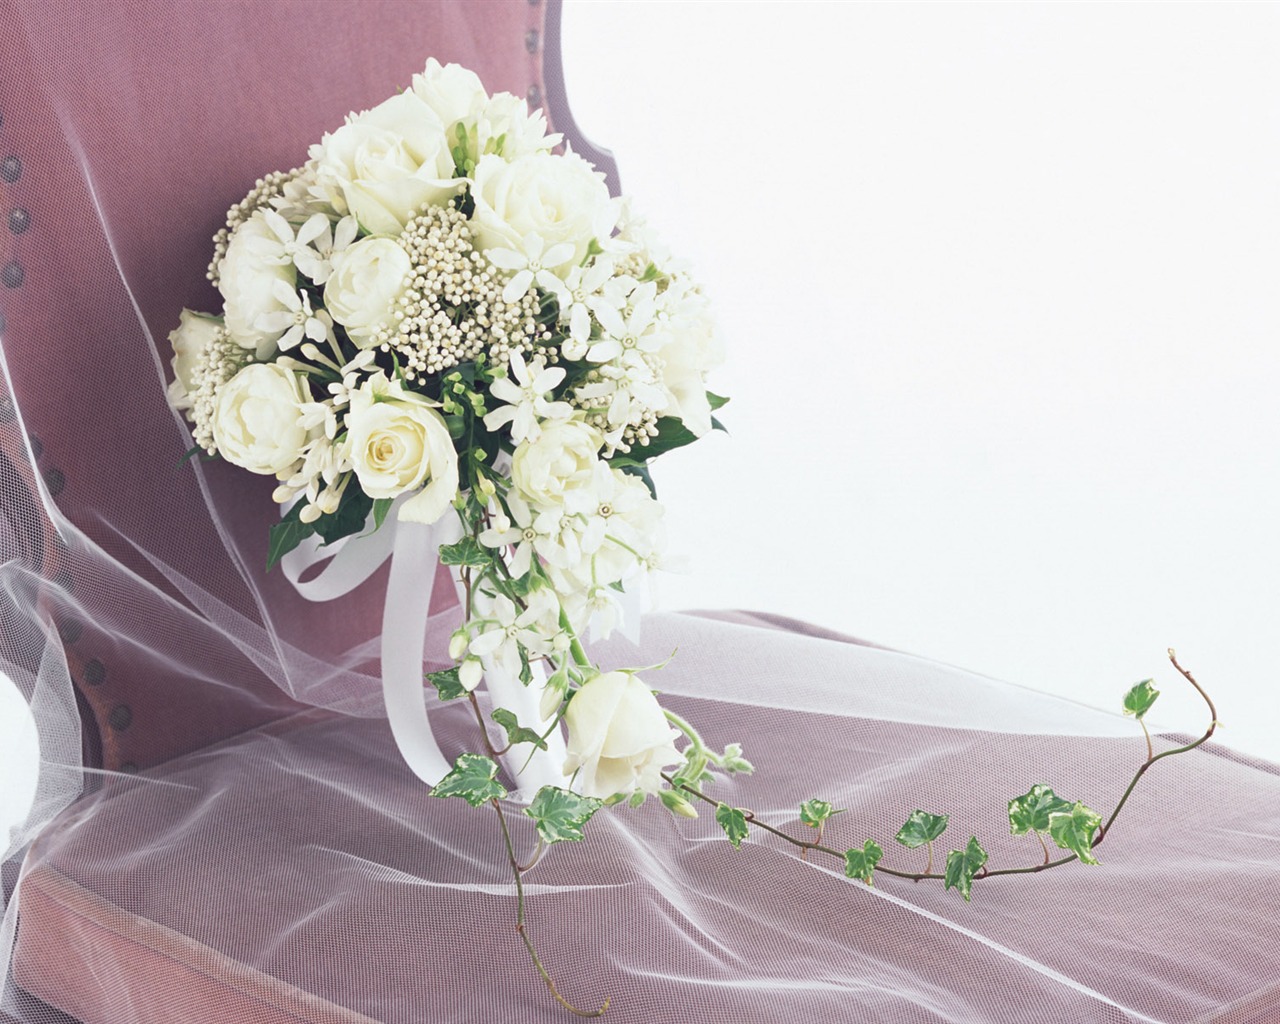 Weddings and Flowers wallpaper (1) #7 - 1280x1024